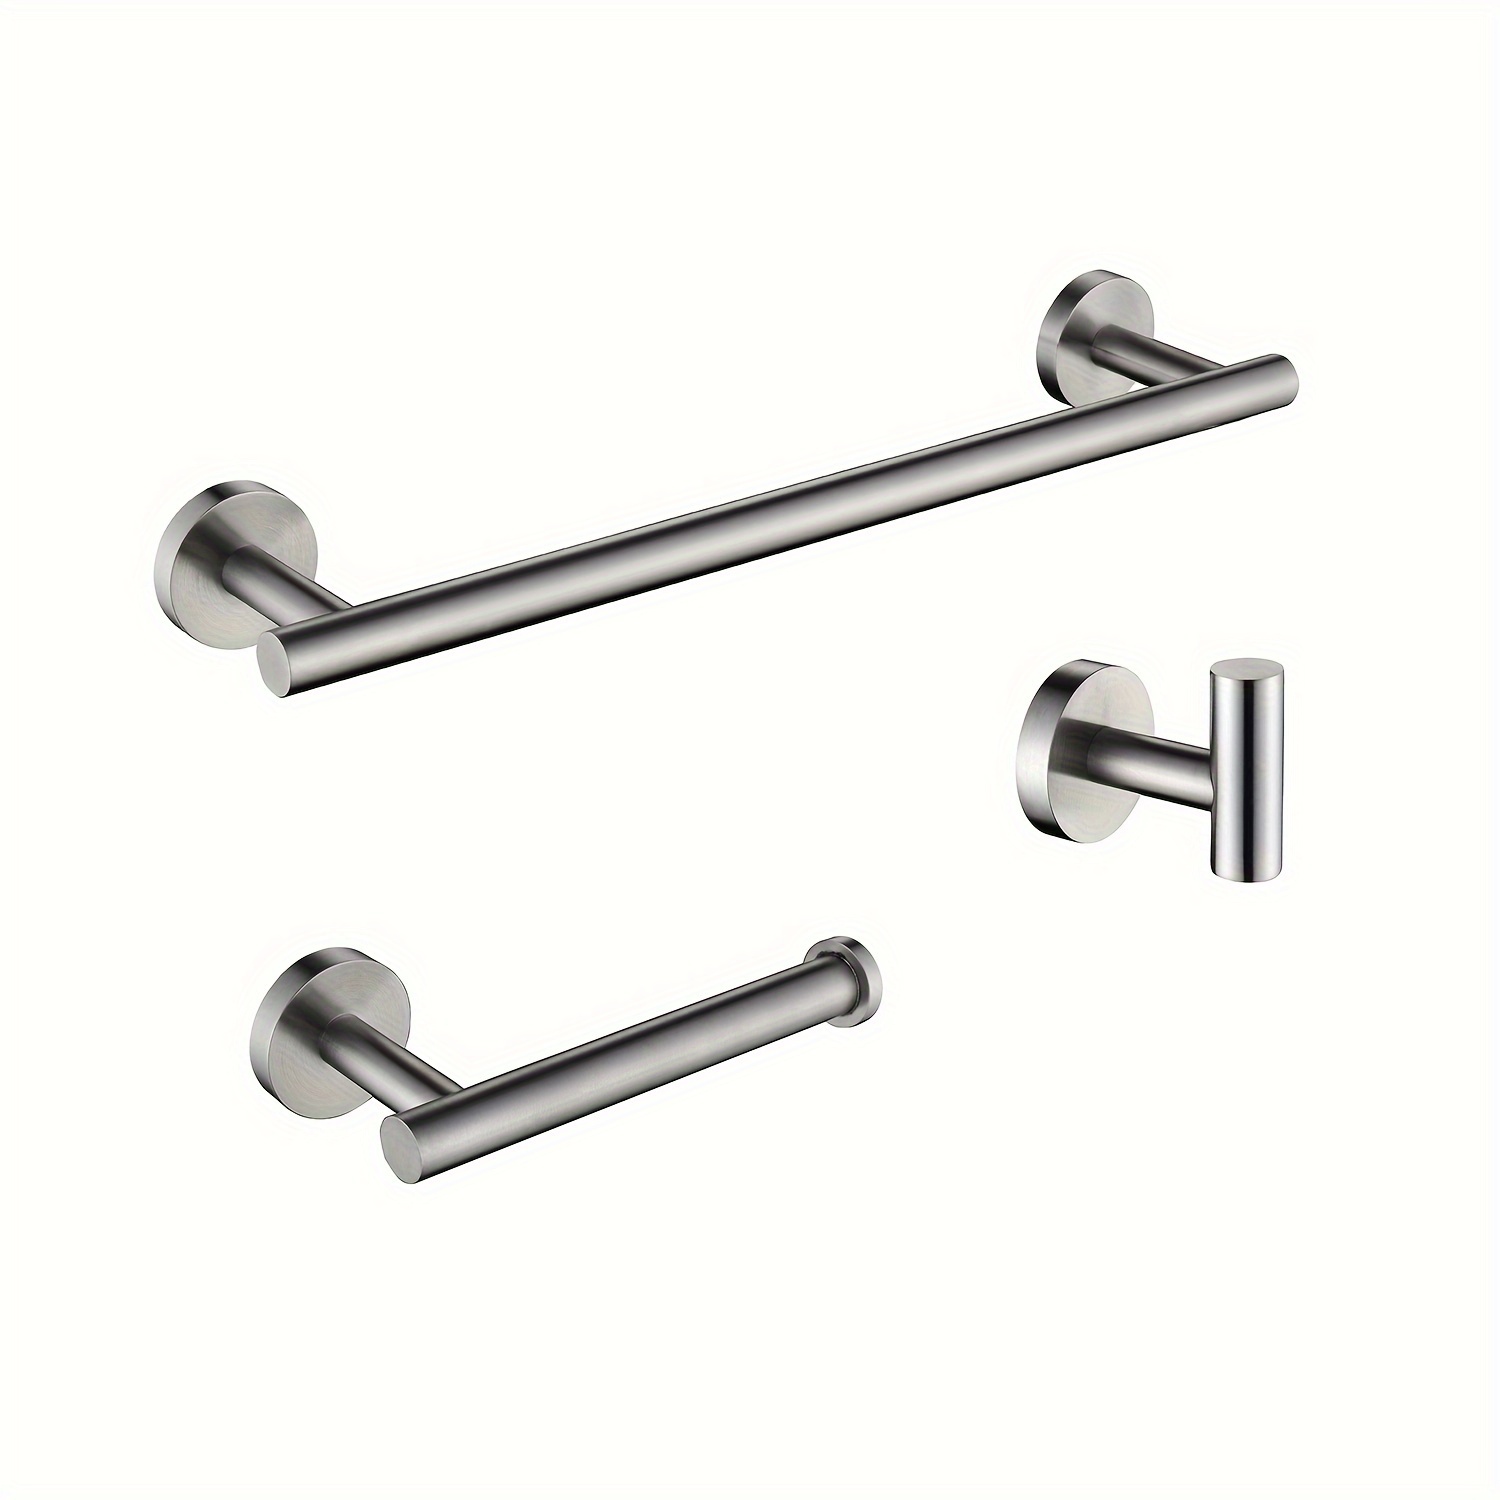 

3 Pcs Bathroom Hardware Accessories Set, Stainless Steel, Towel Bar Set, Includes Towel Bar, Toilet Paper Holder And Towel Hooks, Wall Mounted